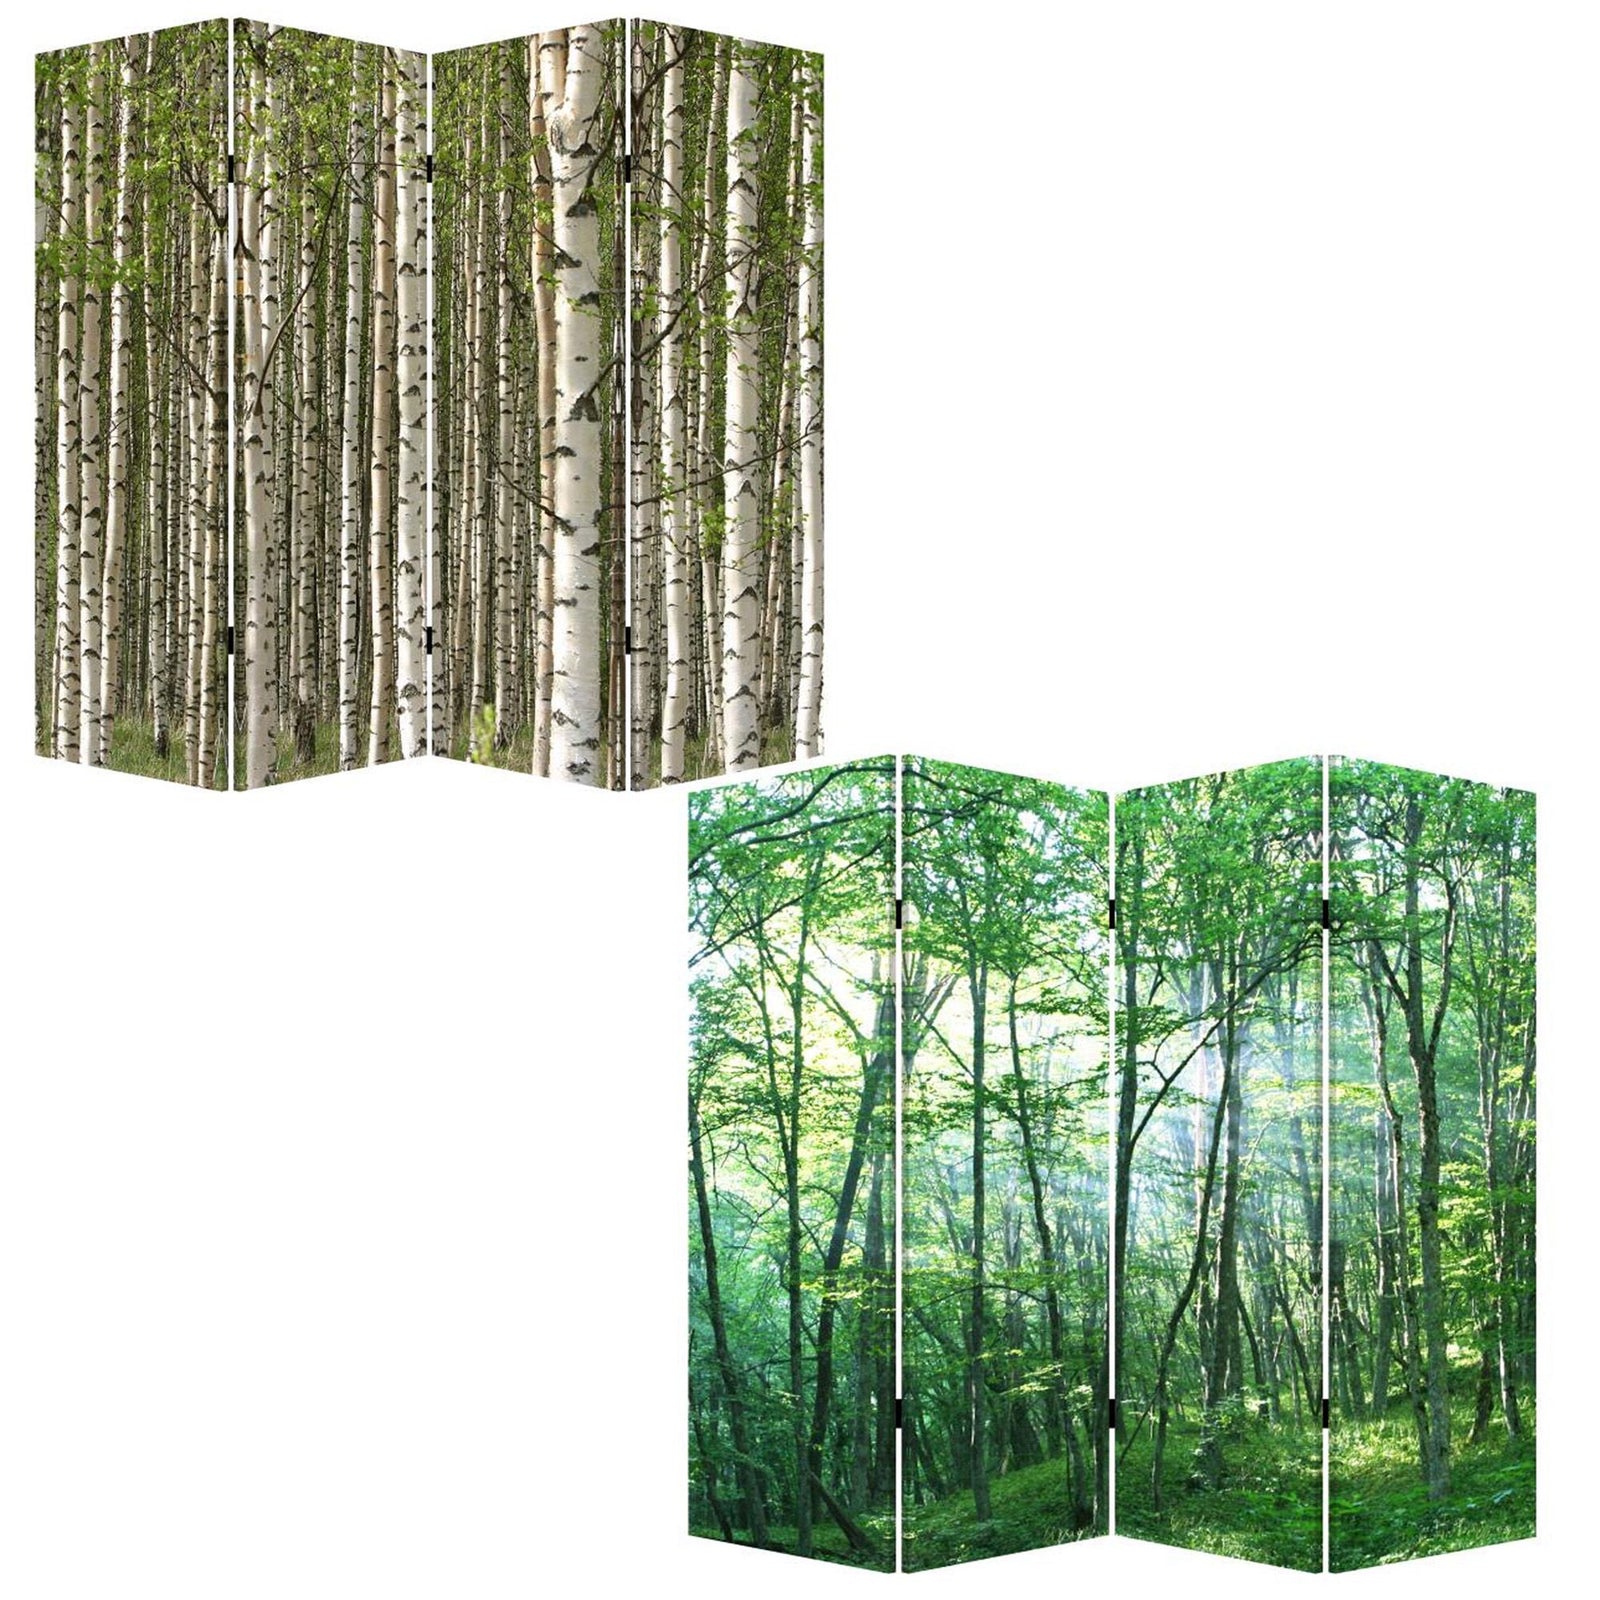 1" X 84" X 84" Multi Color Wood Canvas Prolific Forrest Screen